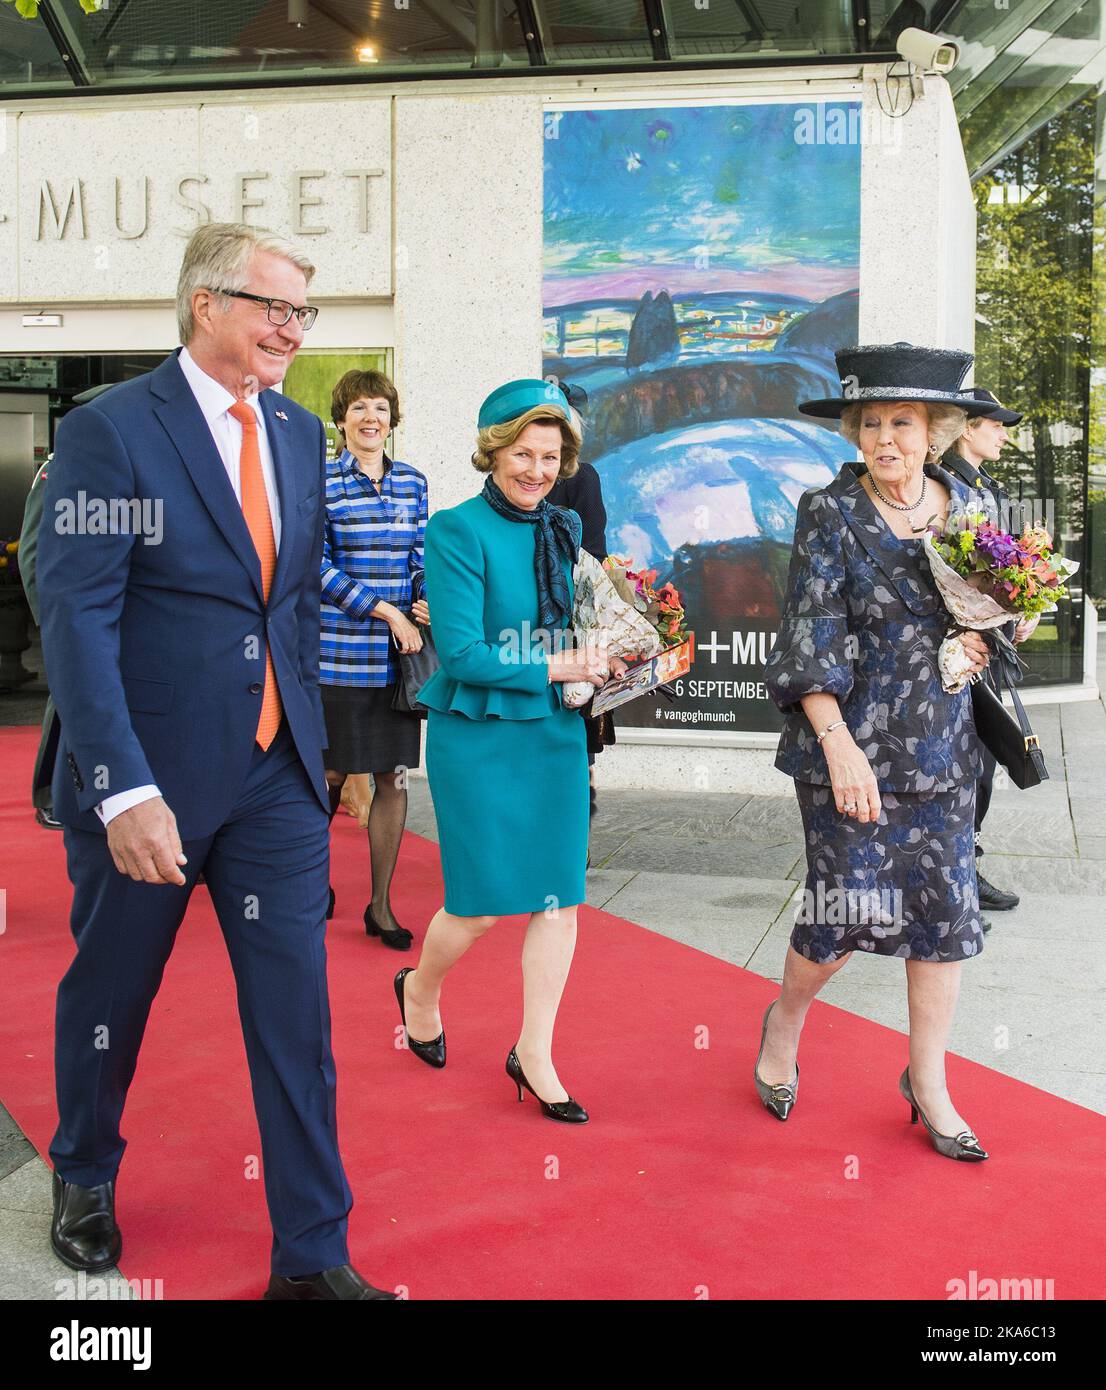 Oslo, Norway 20150509. Mayor of Oslo Fabian Stang, Queen Sonja and Princess Beatrix of the Netherlands attending the opening of an exhibition pairing the works of artists Edvard Munch and Vincent van Gogh at the Munch Museum in Oslo. Photo: Fredrik Varfjell, NTB scanpix Stock Photo